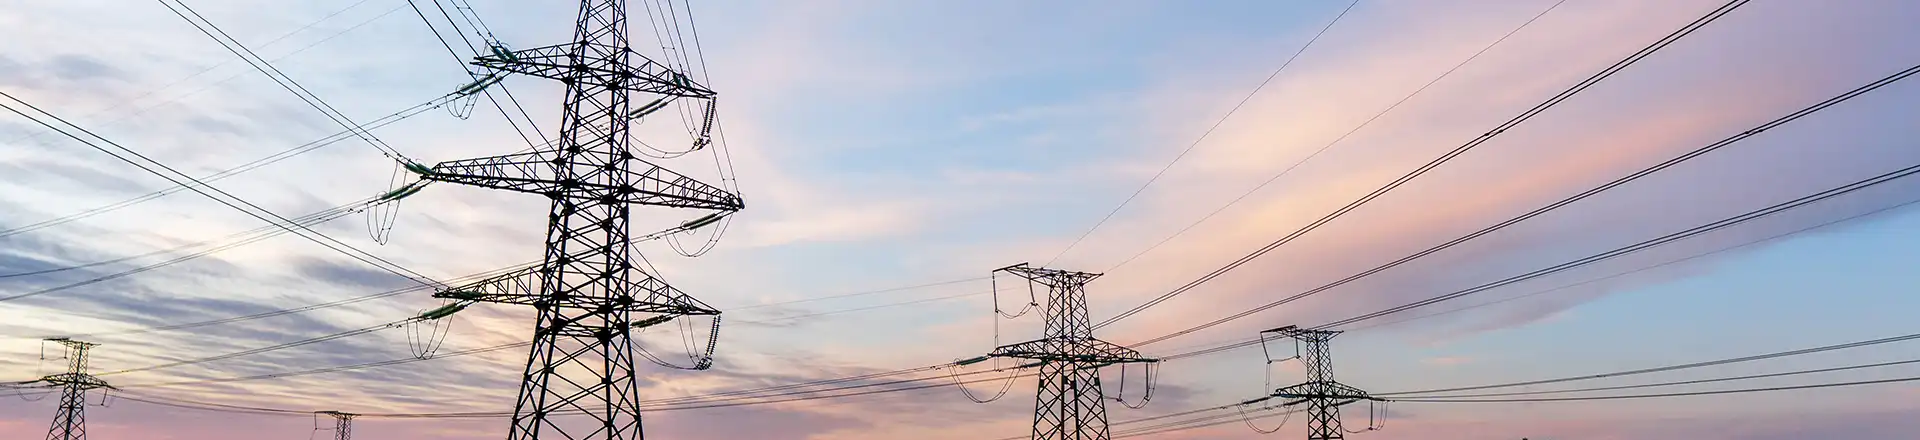 electricity transmission towers